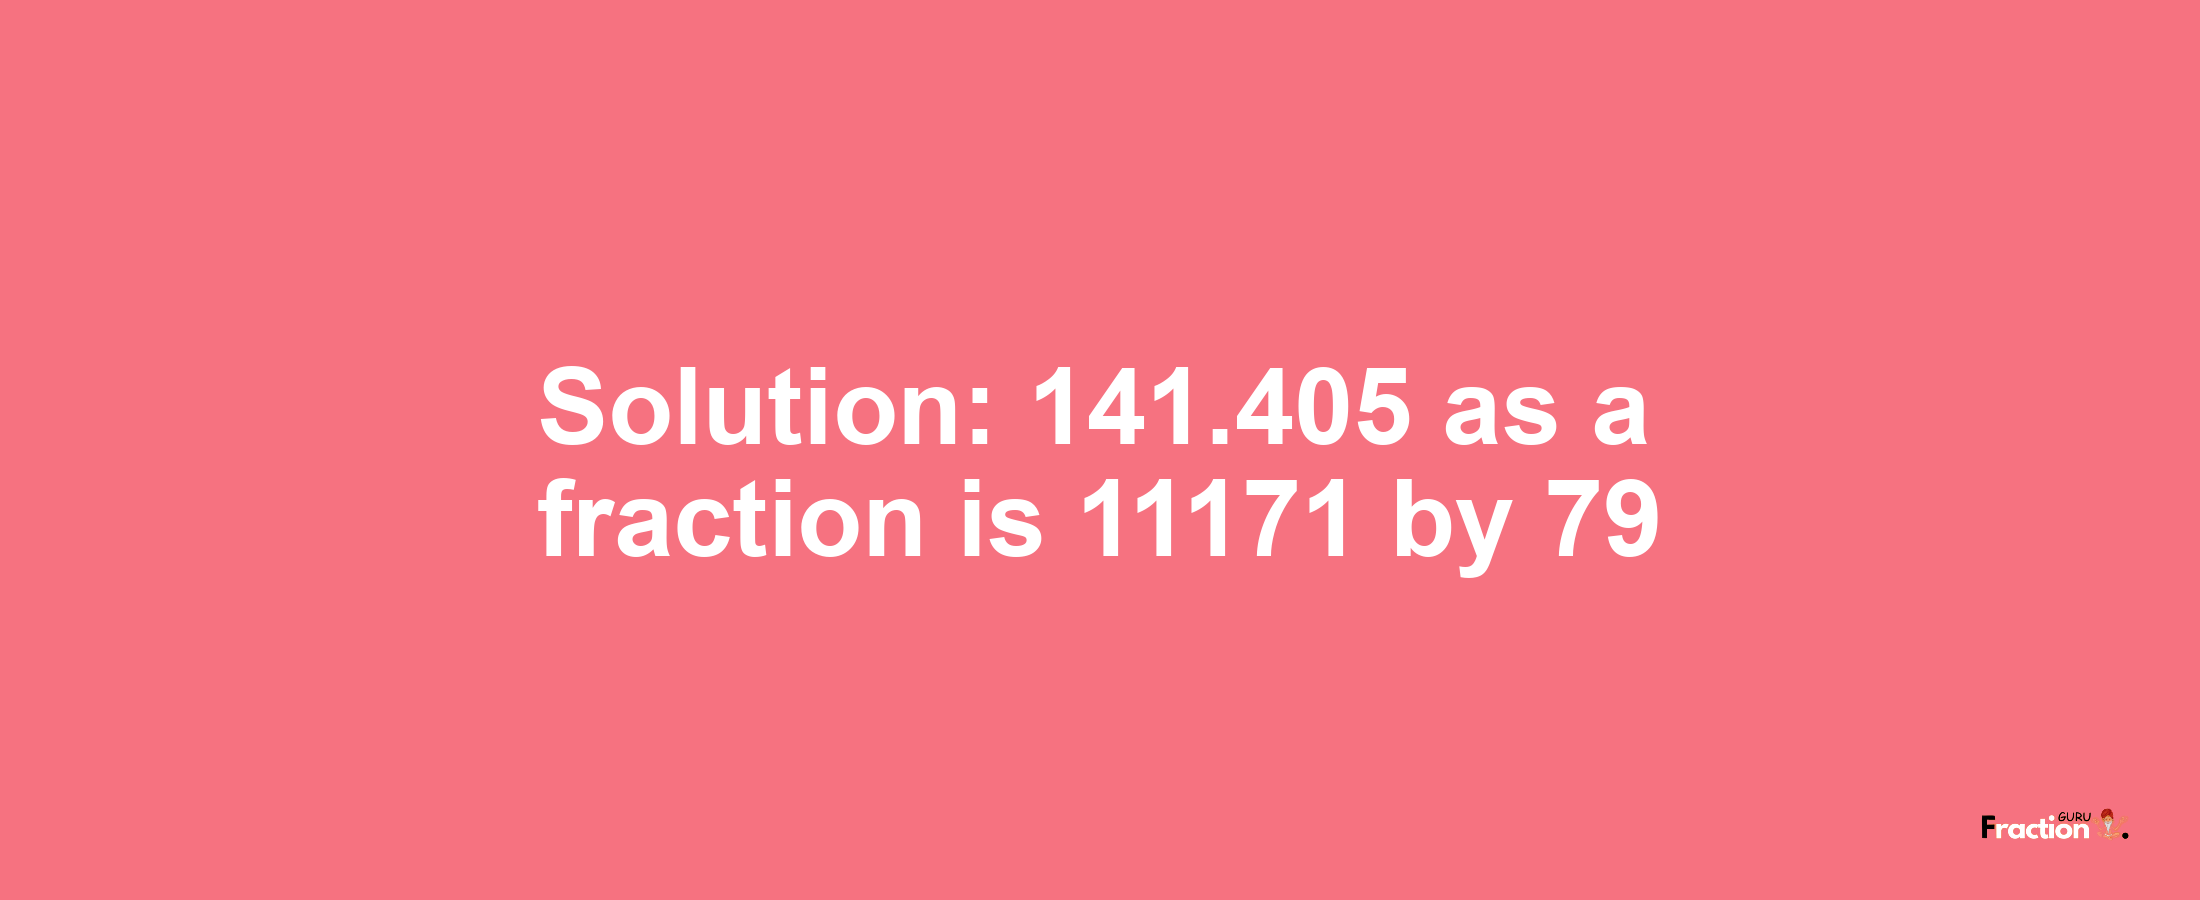 Solution:141.405 as a fraction is 11171/79